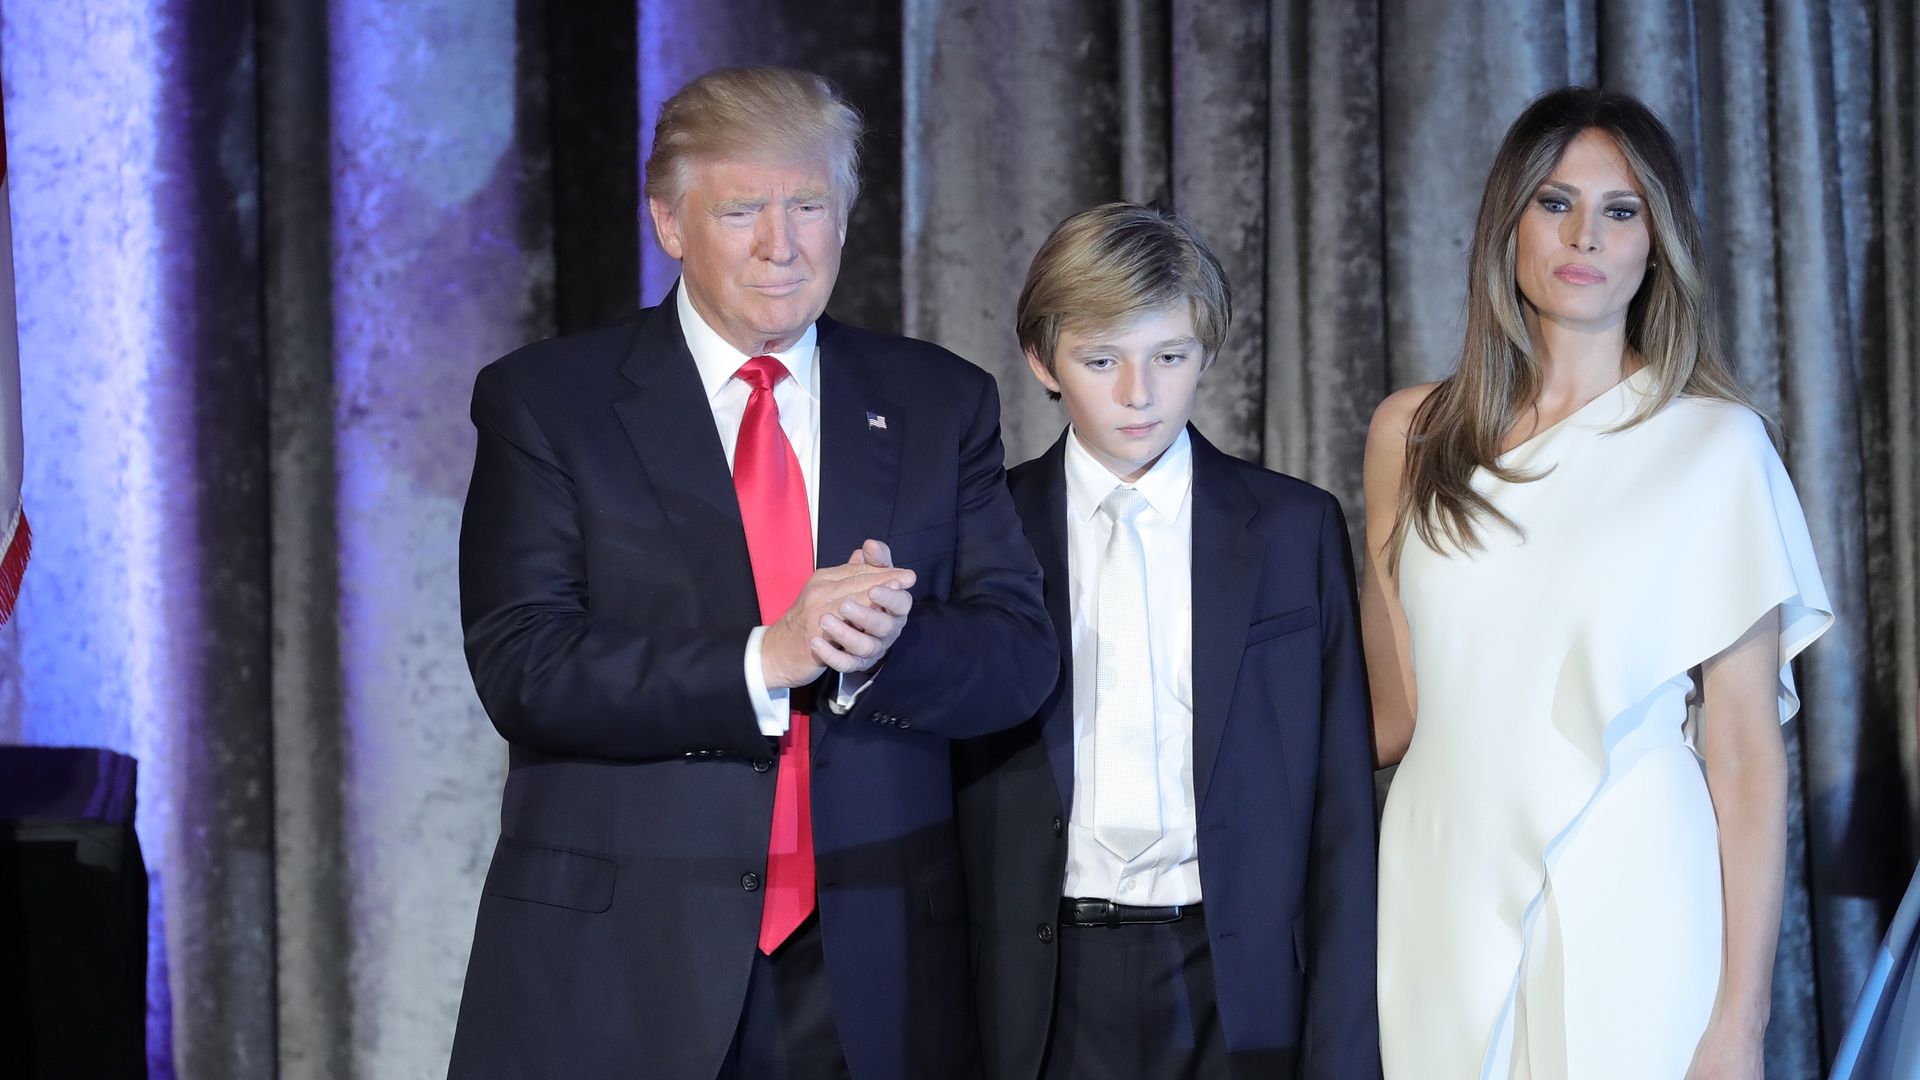 Donald Trump's son, Barron, 18, displays towering 6ft 7 physique in head-turning photo with ookalike dad